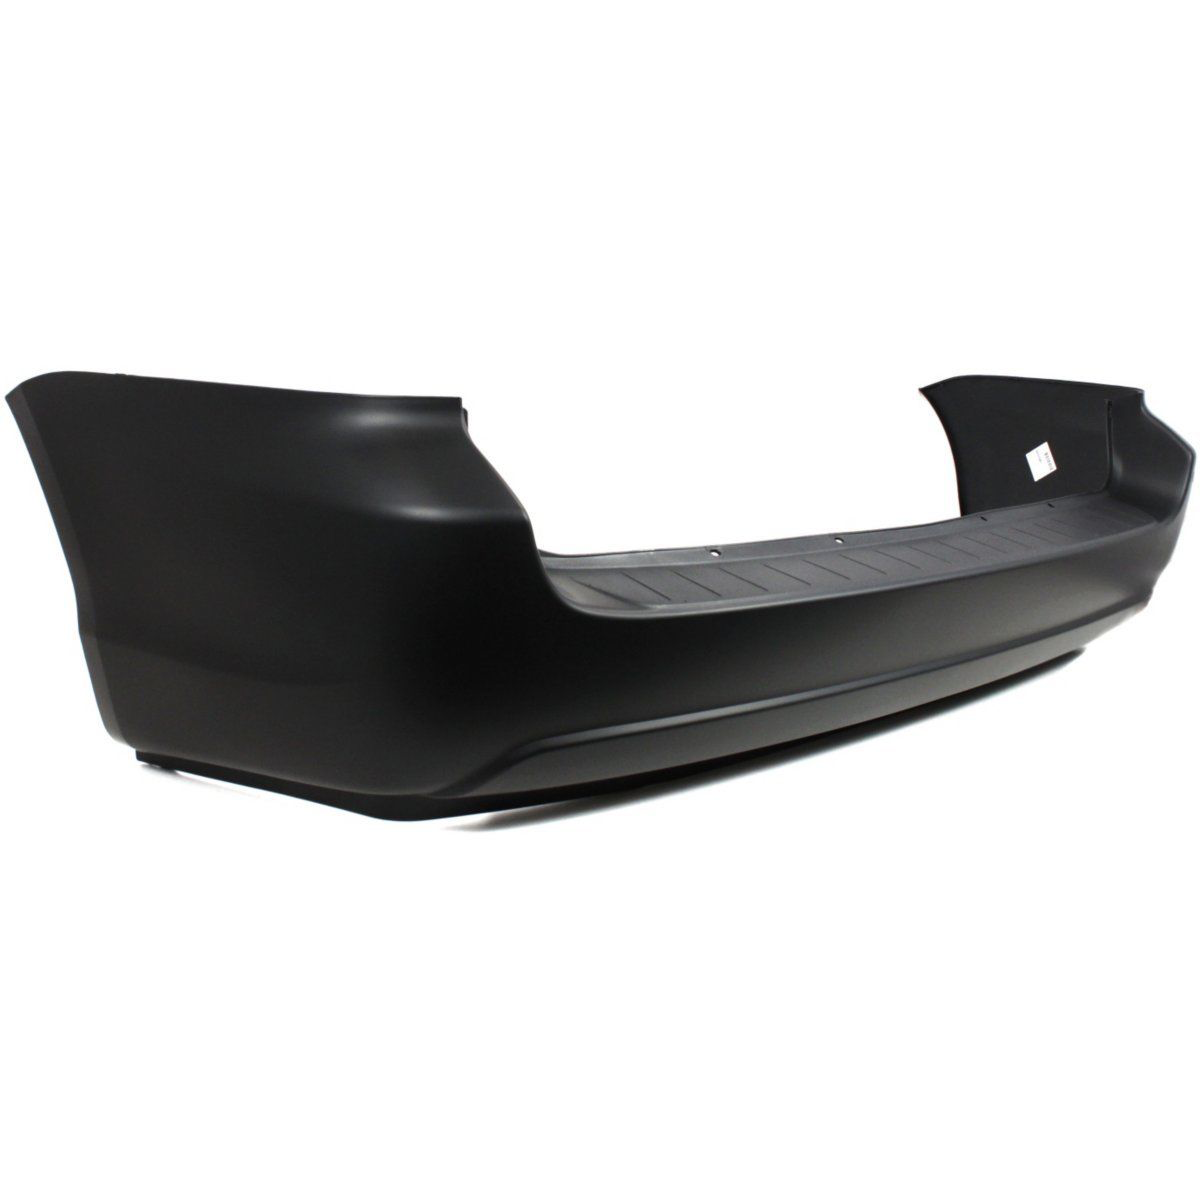 2004-2010 TOYOTA SIENNA Rear Bumper Cover w/o park sensor Painted to Match